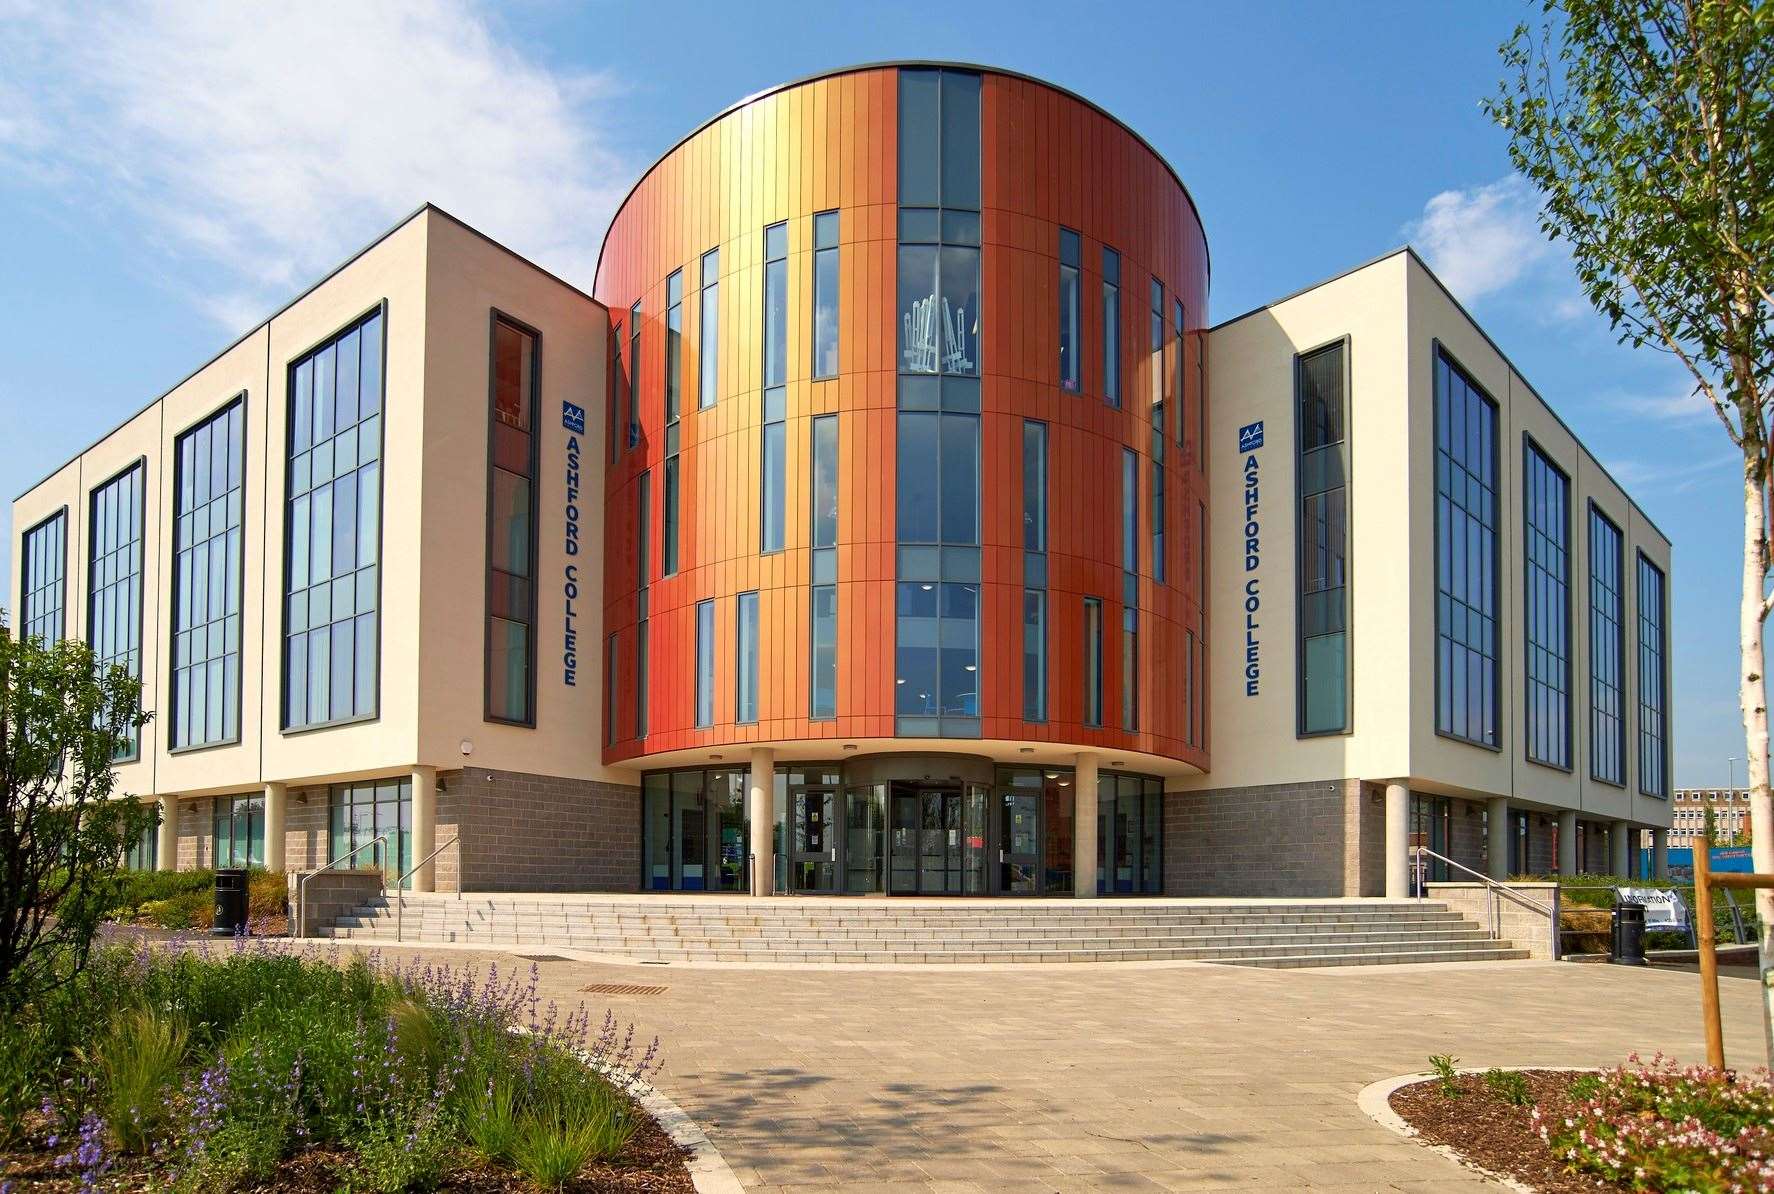 Ashford College would ultimately become part of the East Kent College Group